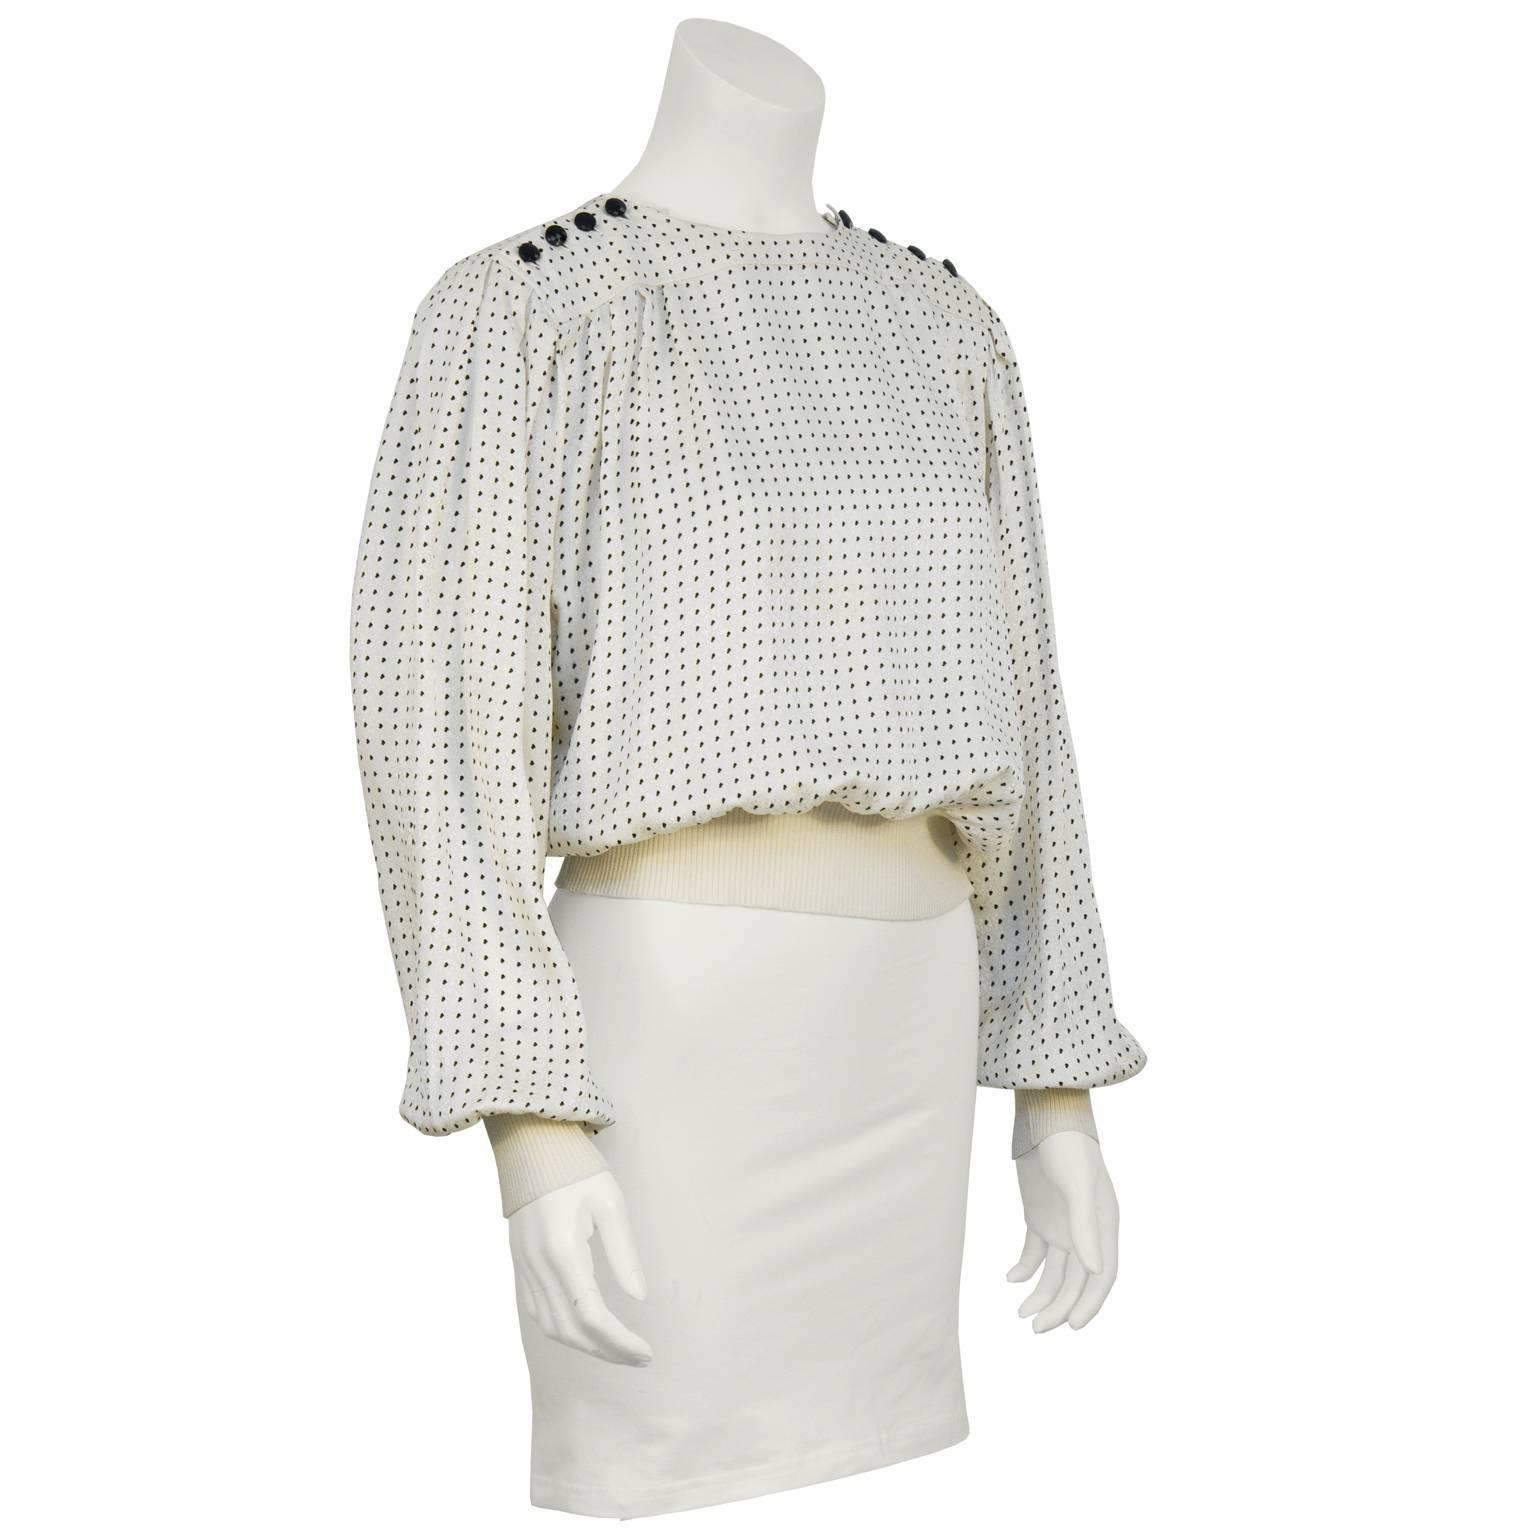 Emanuel Ungaro off white and black silk polka dot blouse from the 1980's. The blouse features a yoke neckline with four black faceted round buttons on either shoulder. The hem and cuffs are finished in cream ribbed knit. The top has pleating along